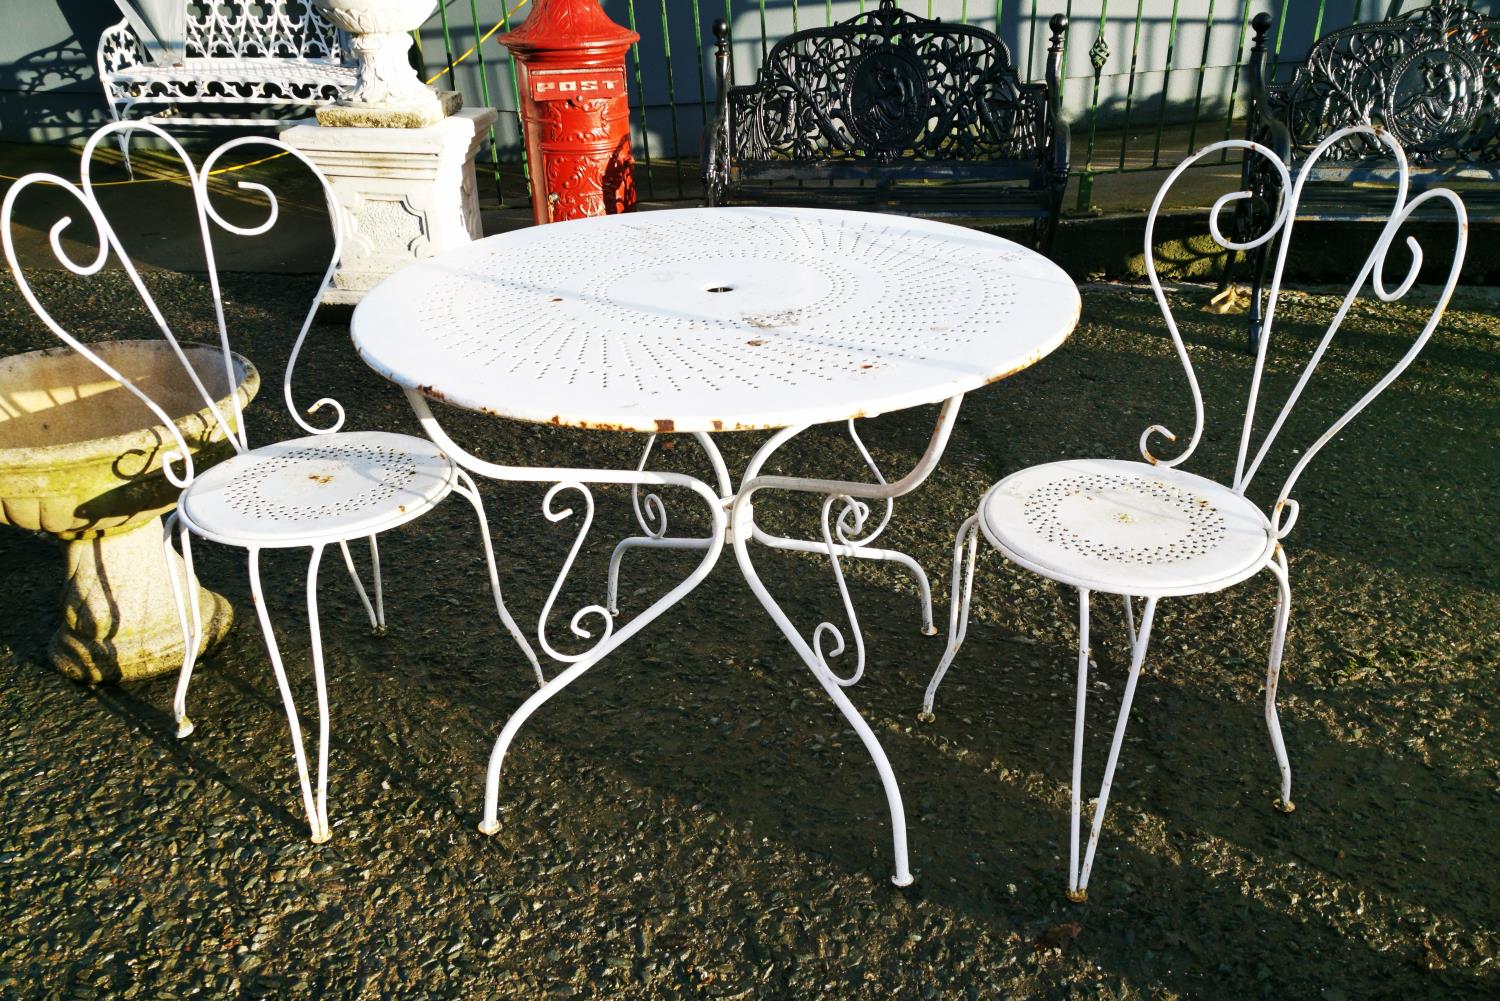 Early 20th C. metal garden table and two chairs.